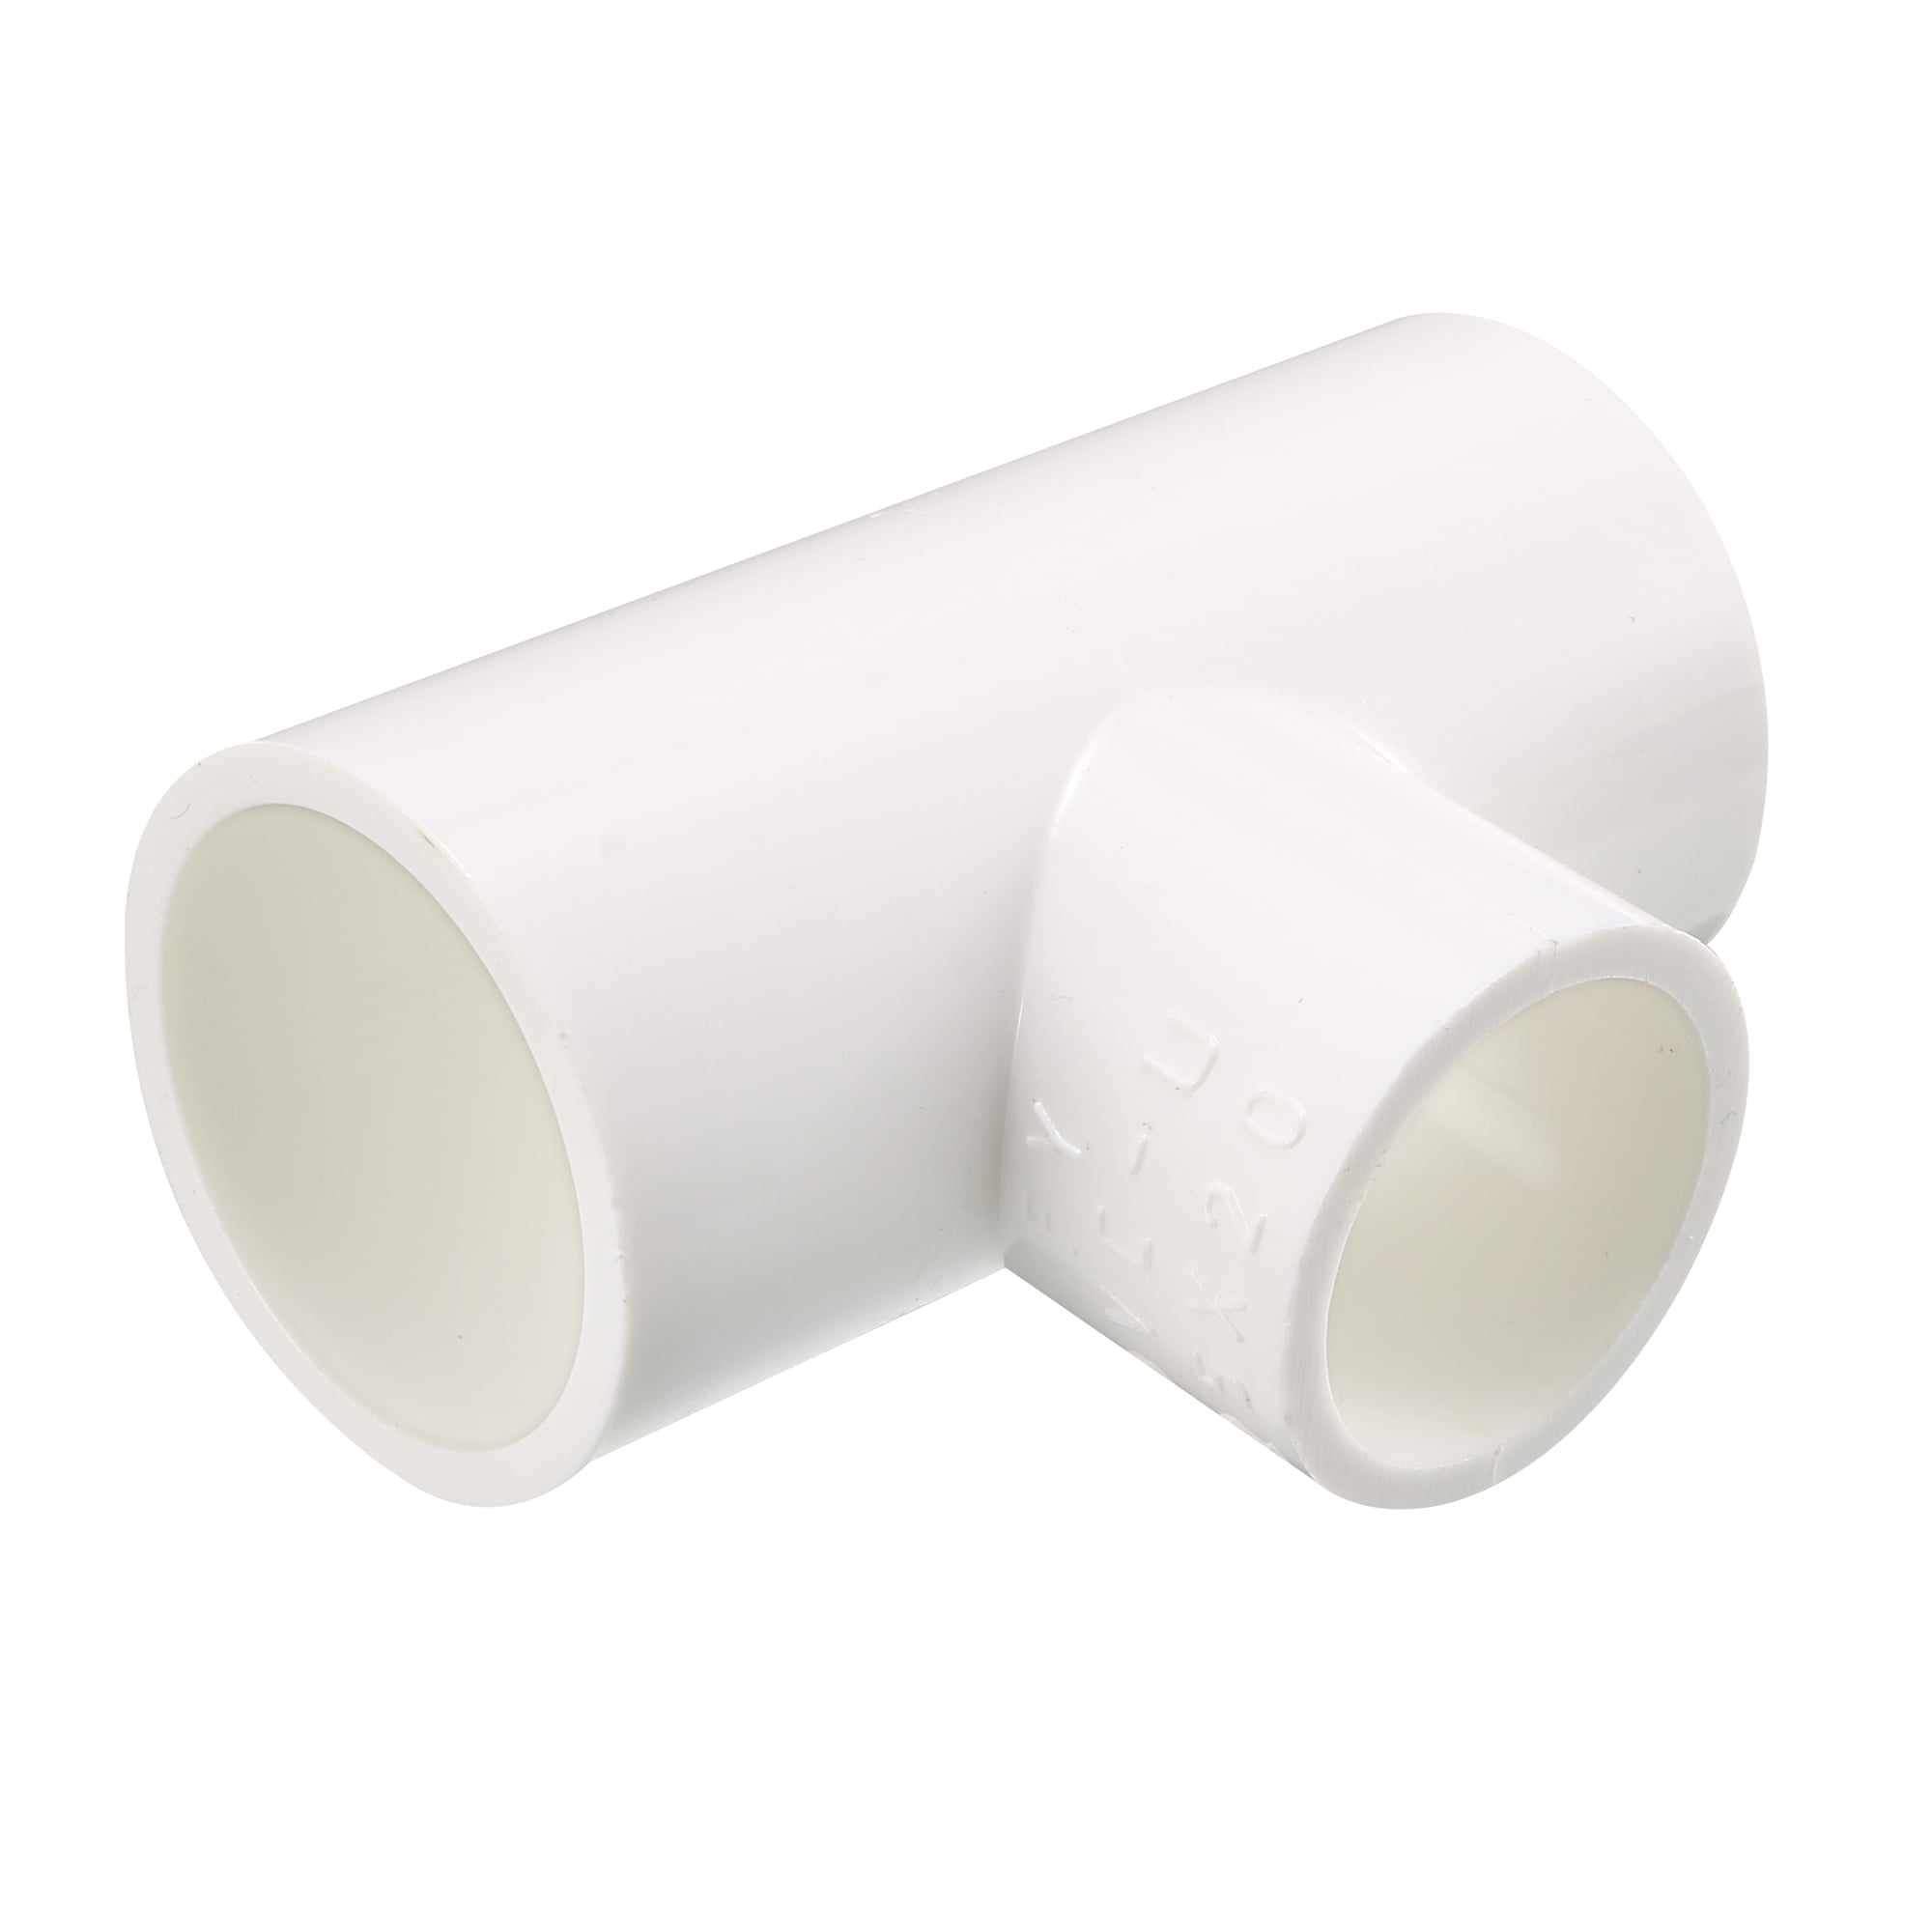 Female Threaded Pipe Fitting 20-110mm PVC Pressure Fittings Reducing Adhesive